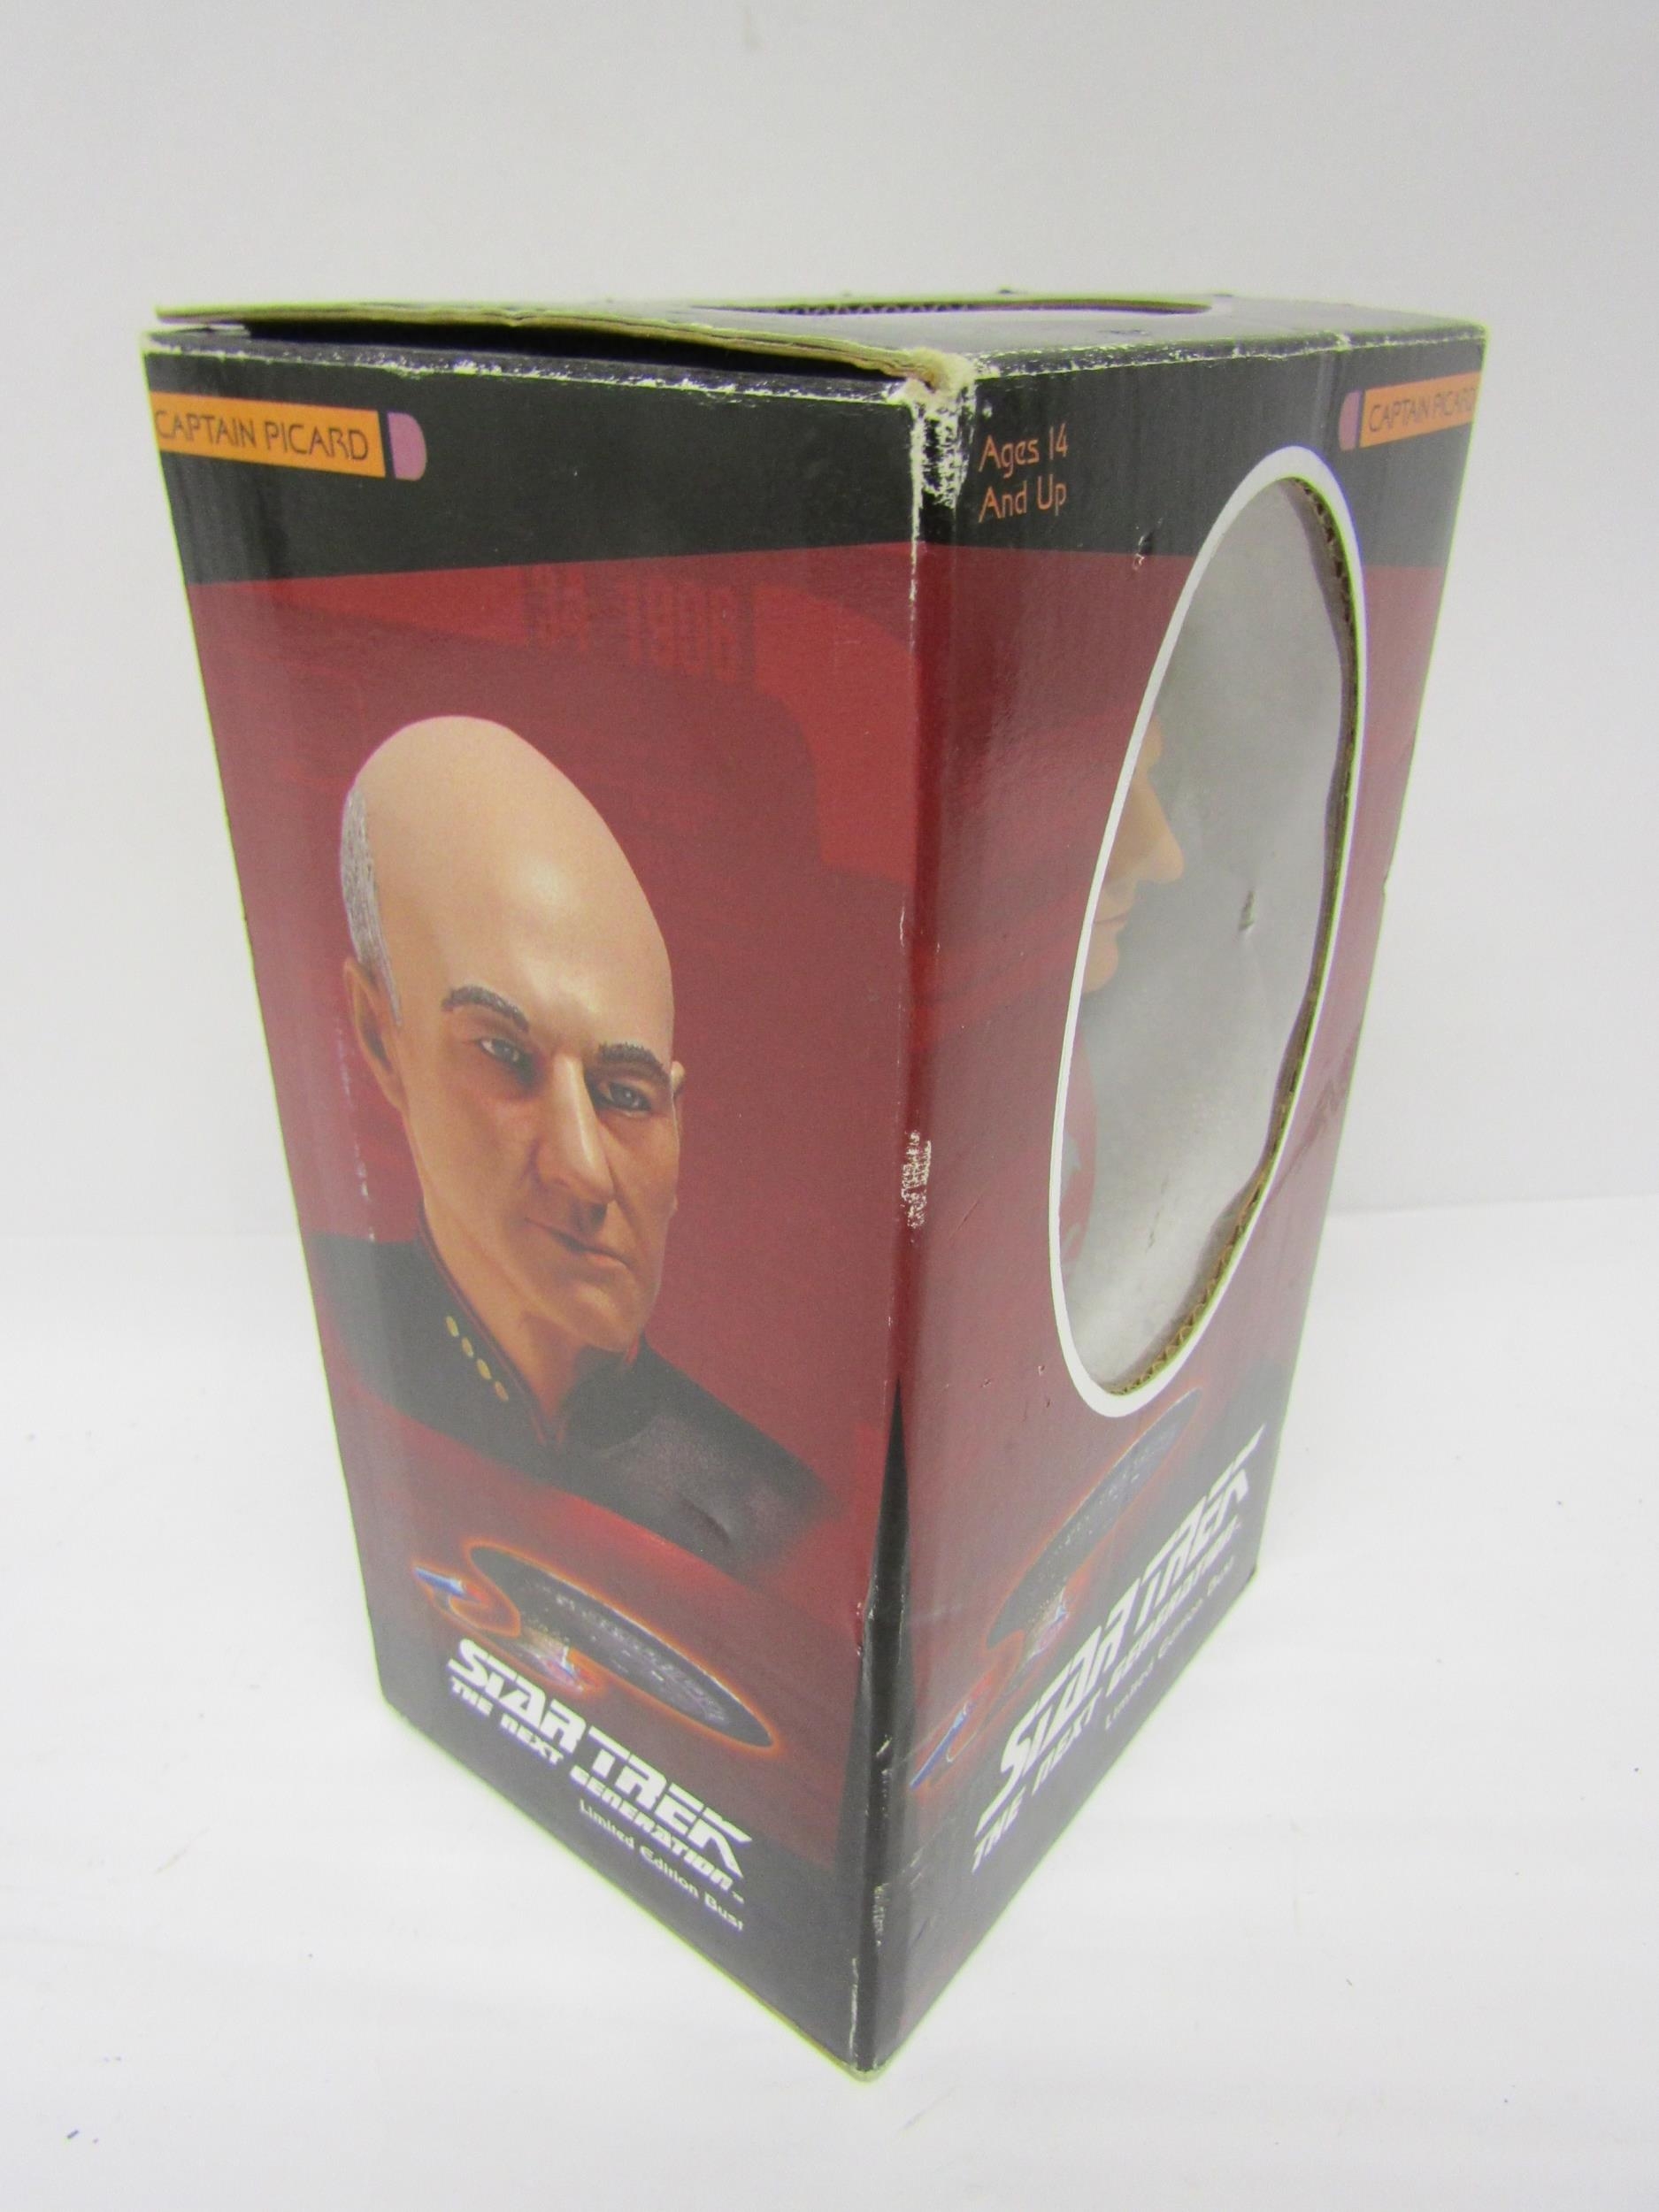 A boxed Sideshow Collectibles limited edition bust of Patrick Stewart as Captain Jean Luc Picard - Image 4 of 6